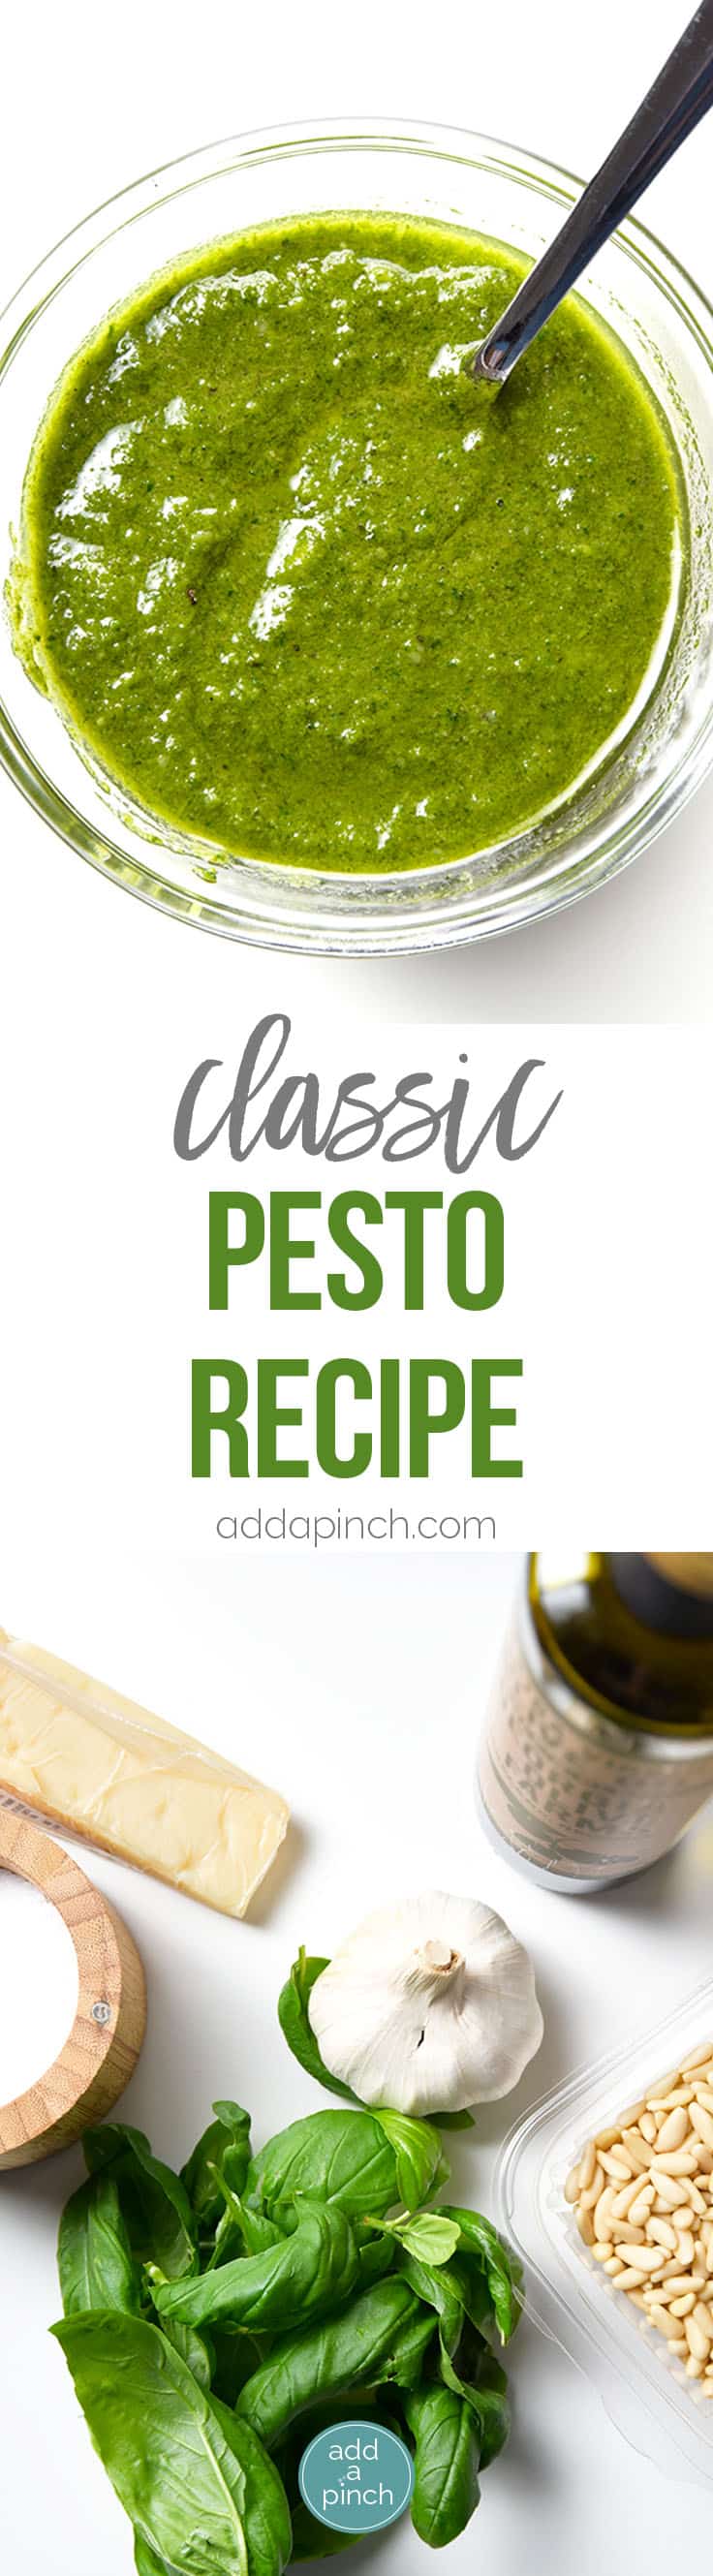 Classic Pesto Recipe - Made of fresh basil, garlic, nuts, olive oil, and cheese, this pesto recipe comes together in minutes and adds so much flavor to so many dishes! // addapinch.com